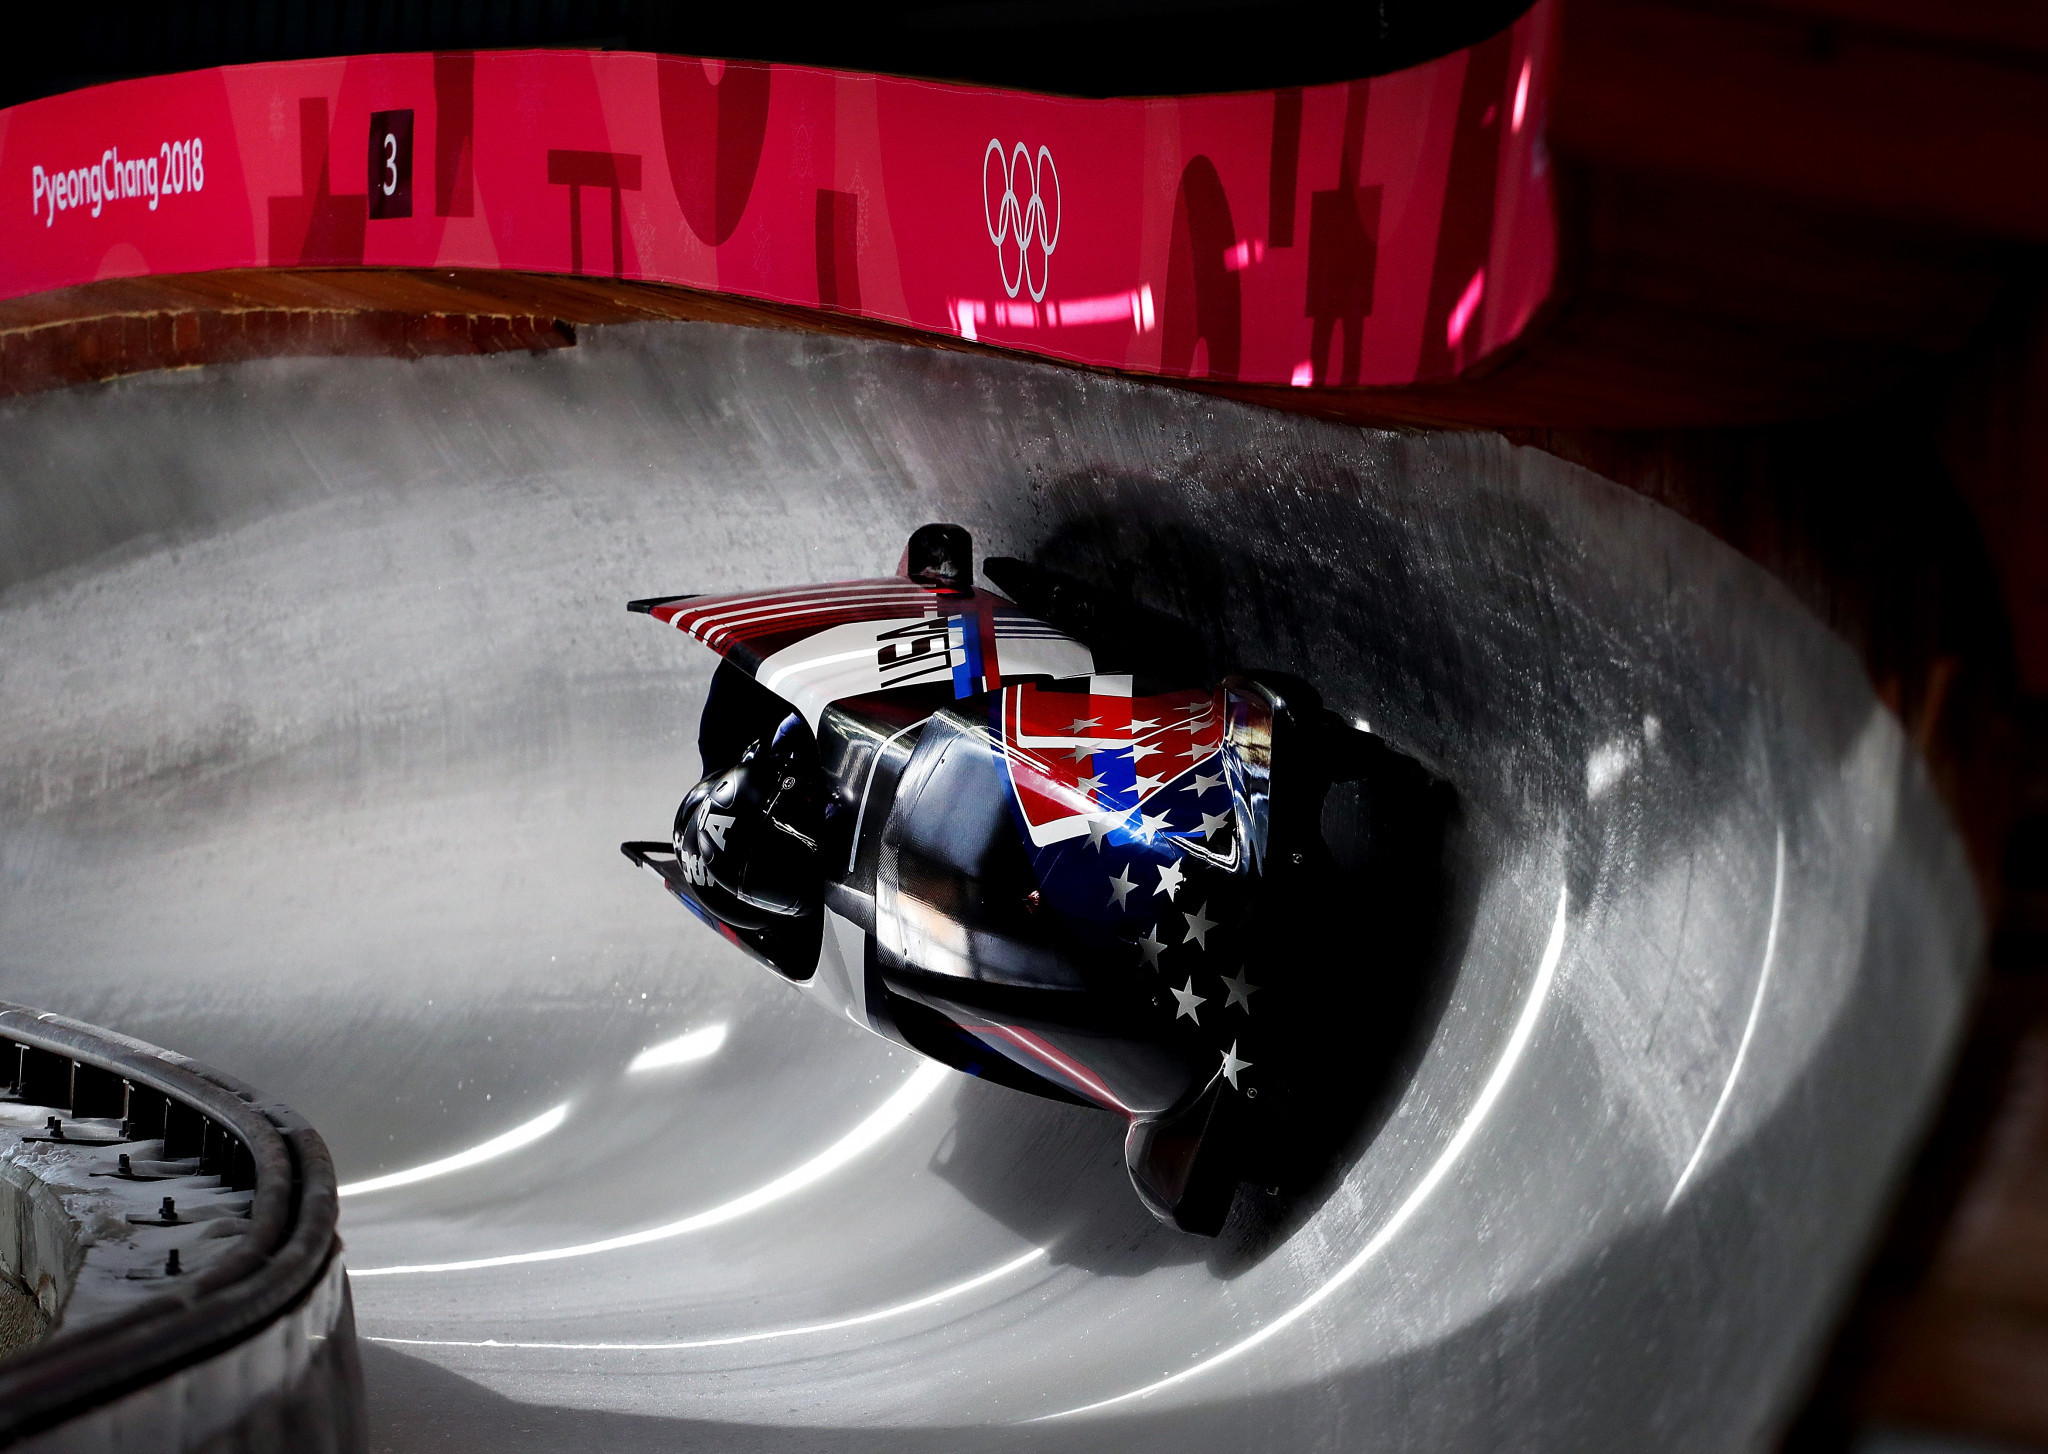 International Bobsleigh and Skeleton Federation budgets more than $700,000 for COVID-19 in current financial year